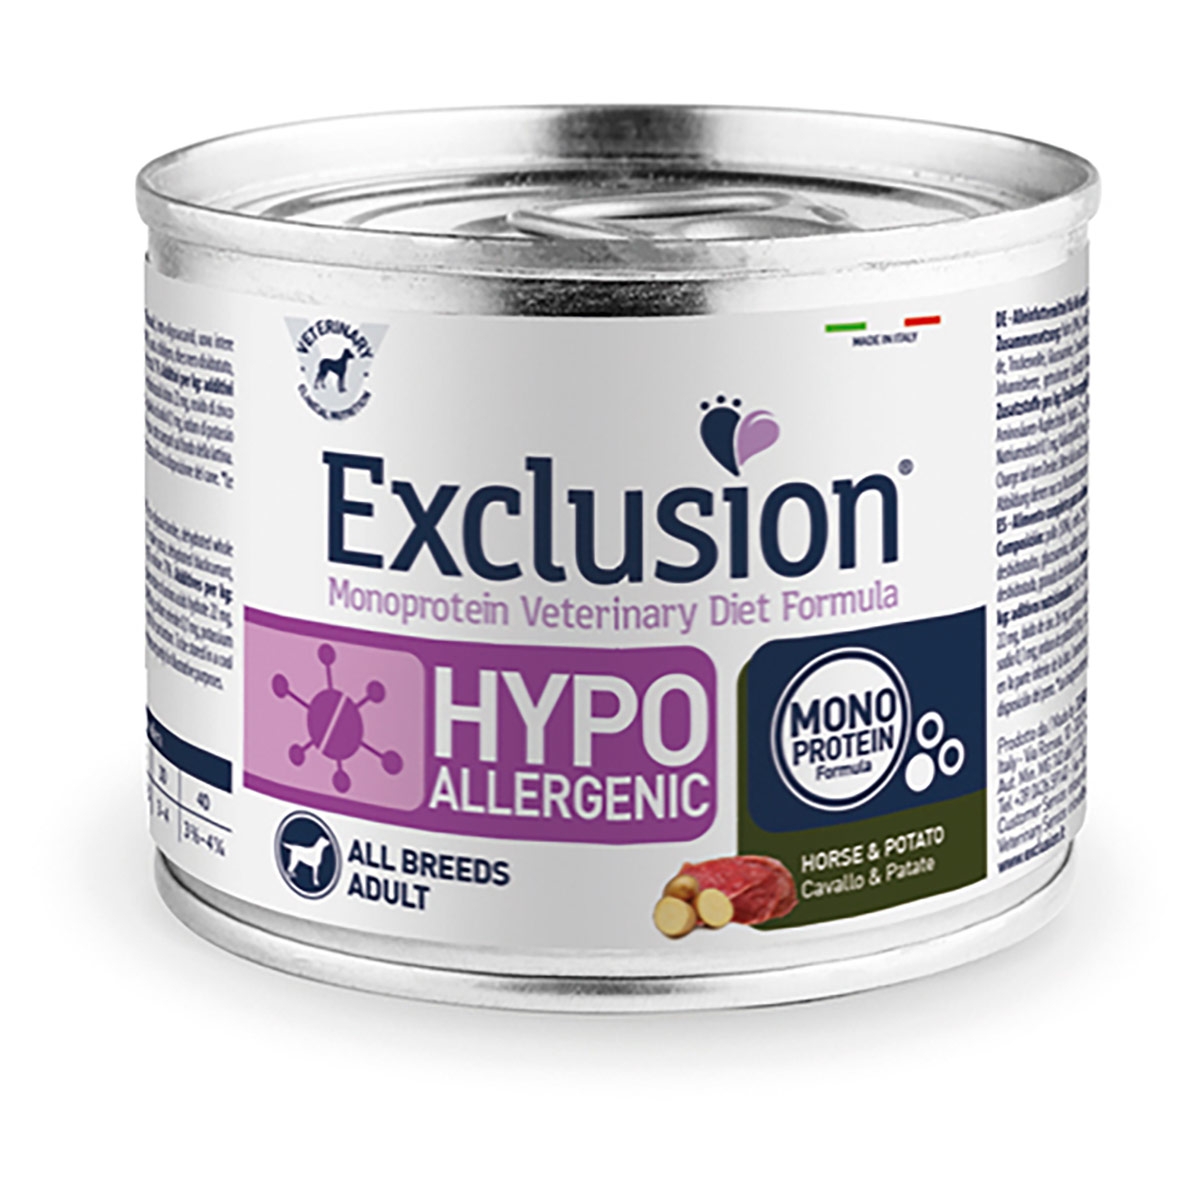 Exclusion Cane Monoprotein Veterinary Diet Hypoallergenic Adulto Medium&large; Pesce&patate; 2 Kg 2.00 Kg